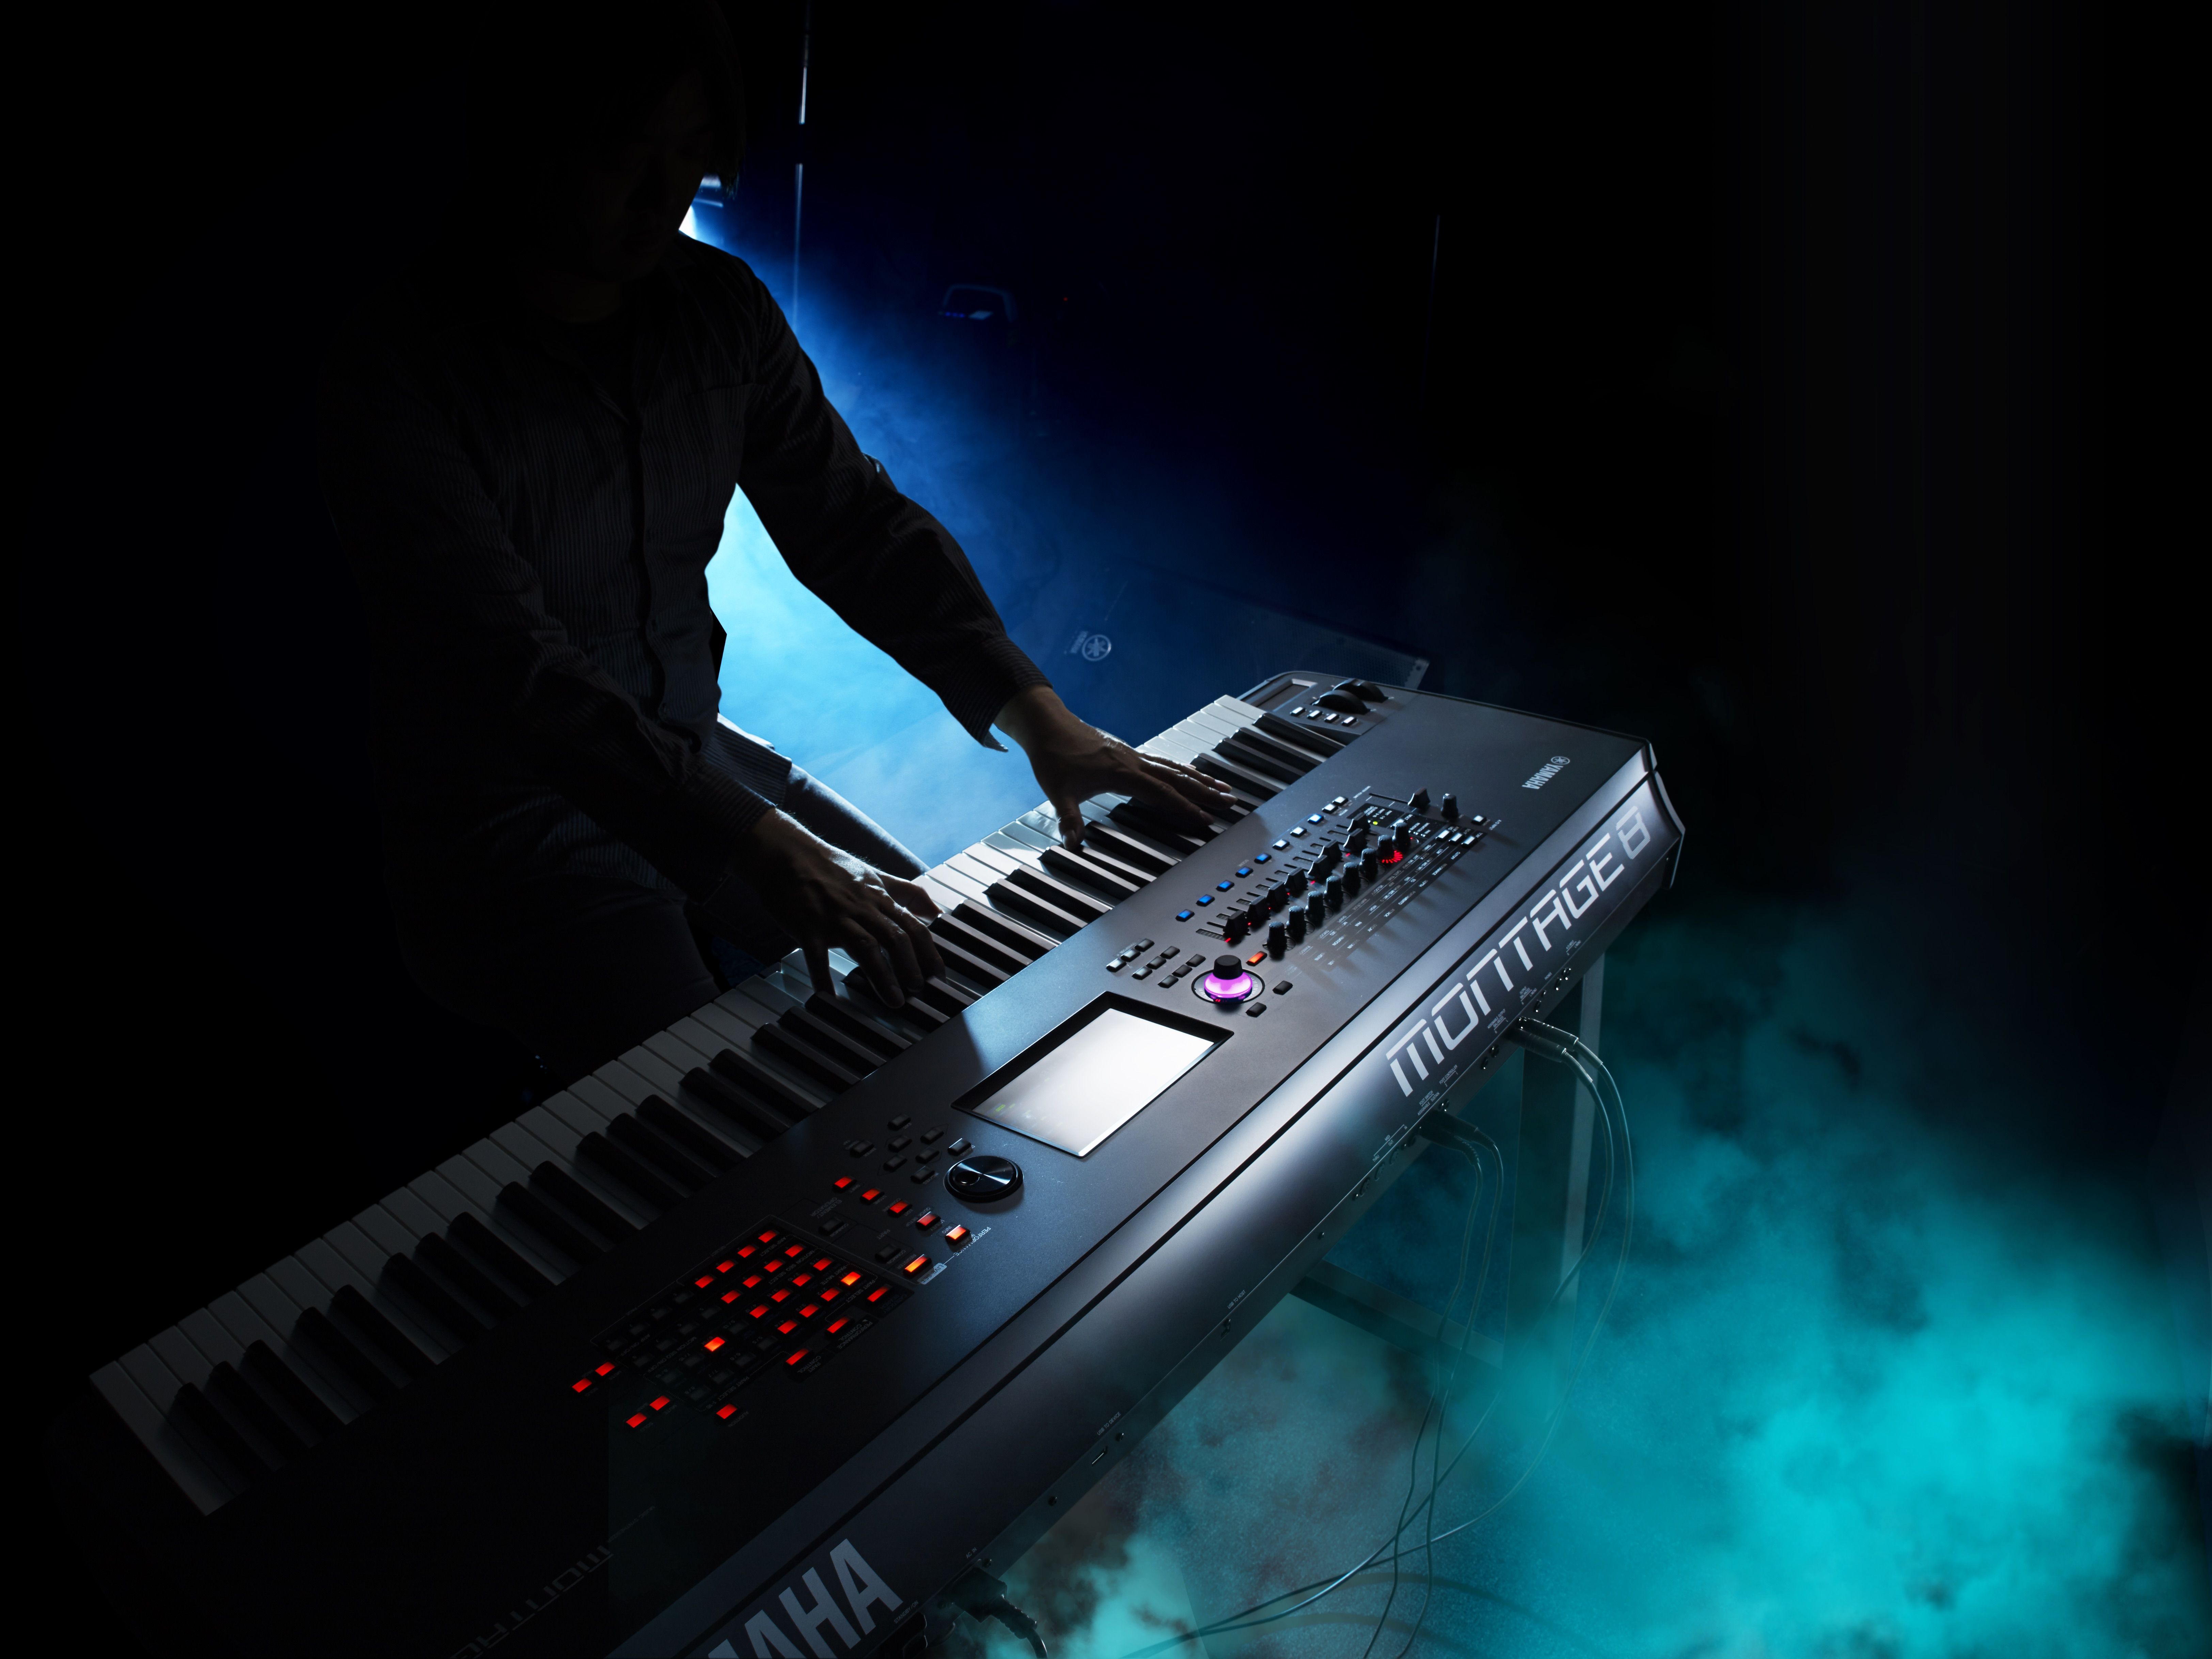 Yamaha Expands MX Series With 88 Key, Weighted Action MX Combining Synth Features And Real Piano Feel